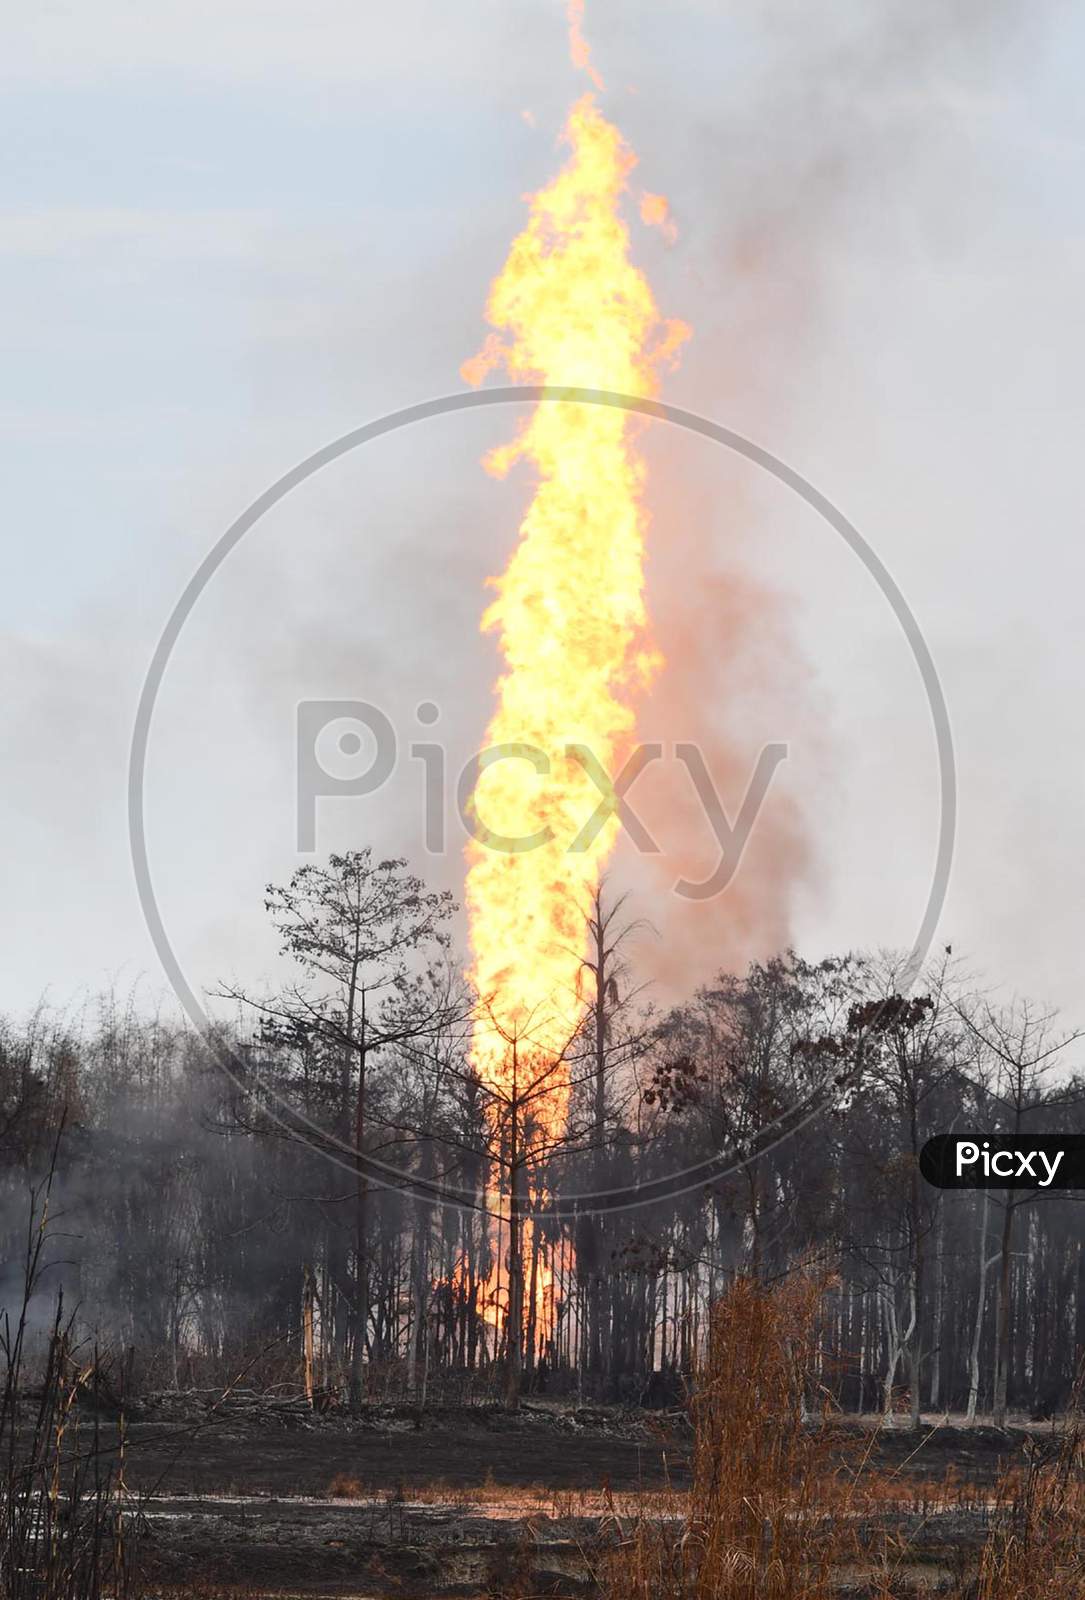 Flames And Smoke Come Out From A Well Run By State-Owned Oil India In Tinsukia District Of Assam On June 10,2020.